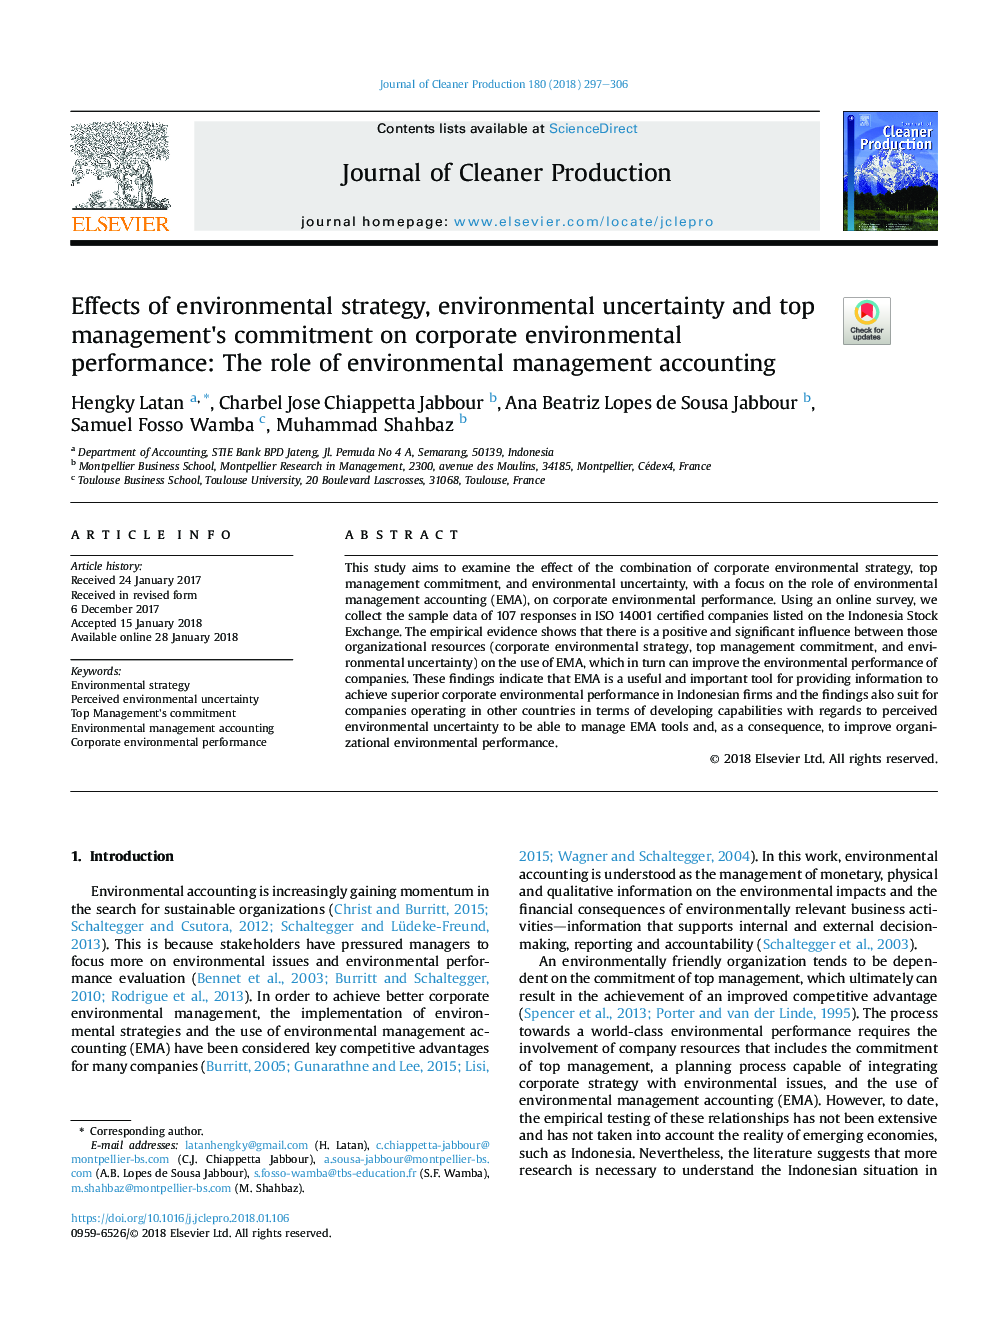 Effects of environmental strategy, environmental uncertainty and top management's commitment on corporate environmental performance: The role of environmental management accounting